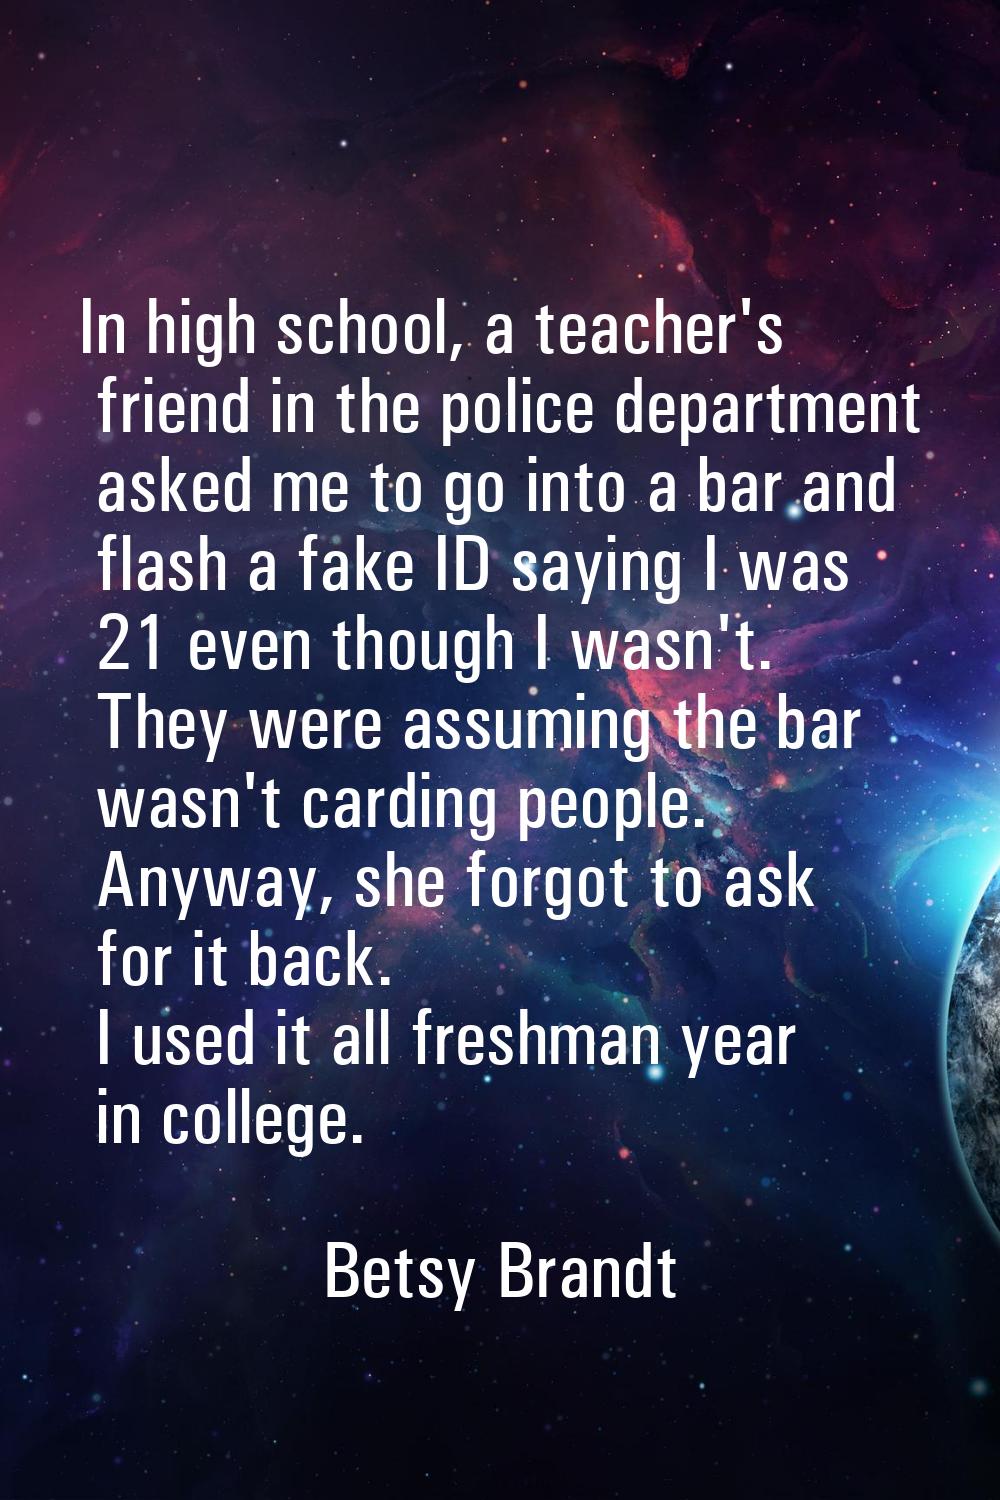 In high school, a teacher's friend in the police department asked me to go into a bar and flash a f